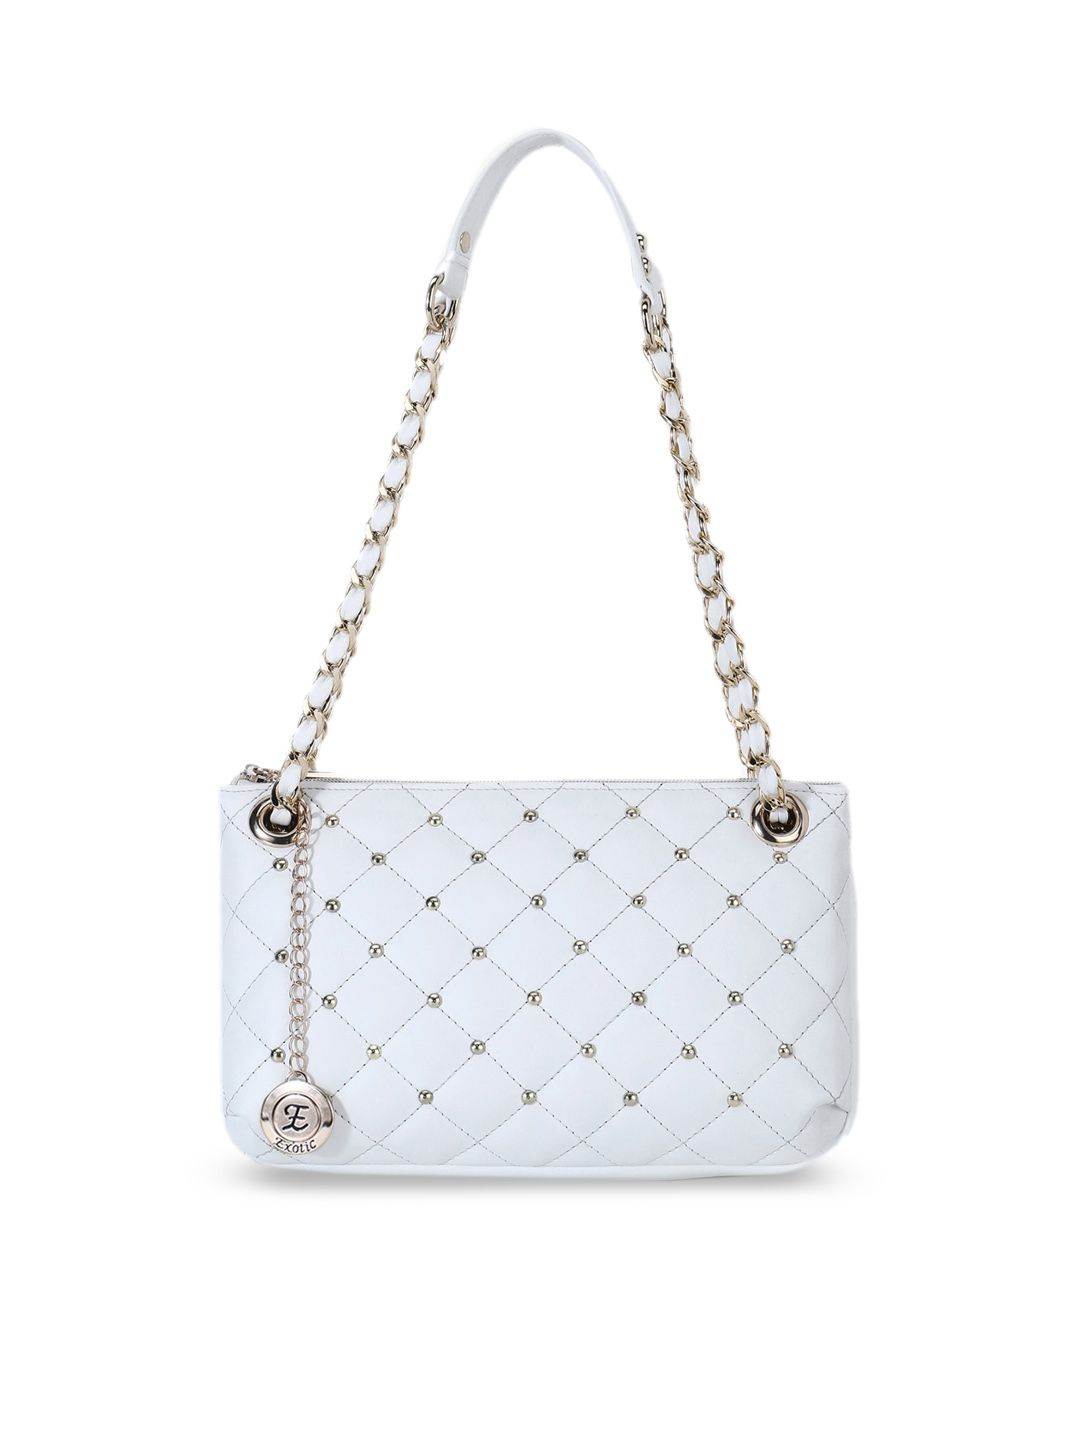 Exotic White Embellished PU Structured Handheld Bag with Quilted Price in India